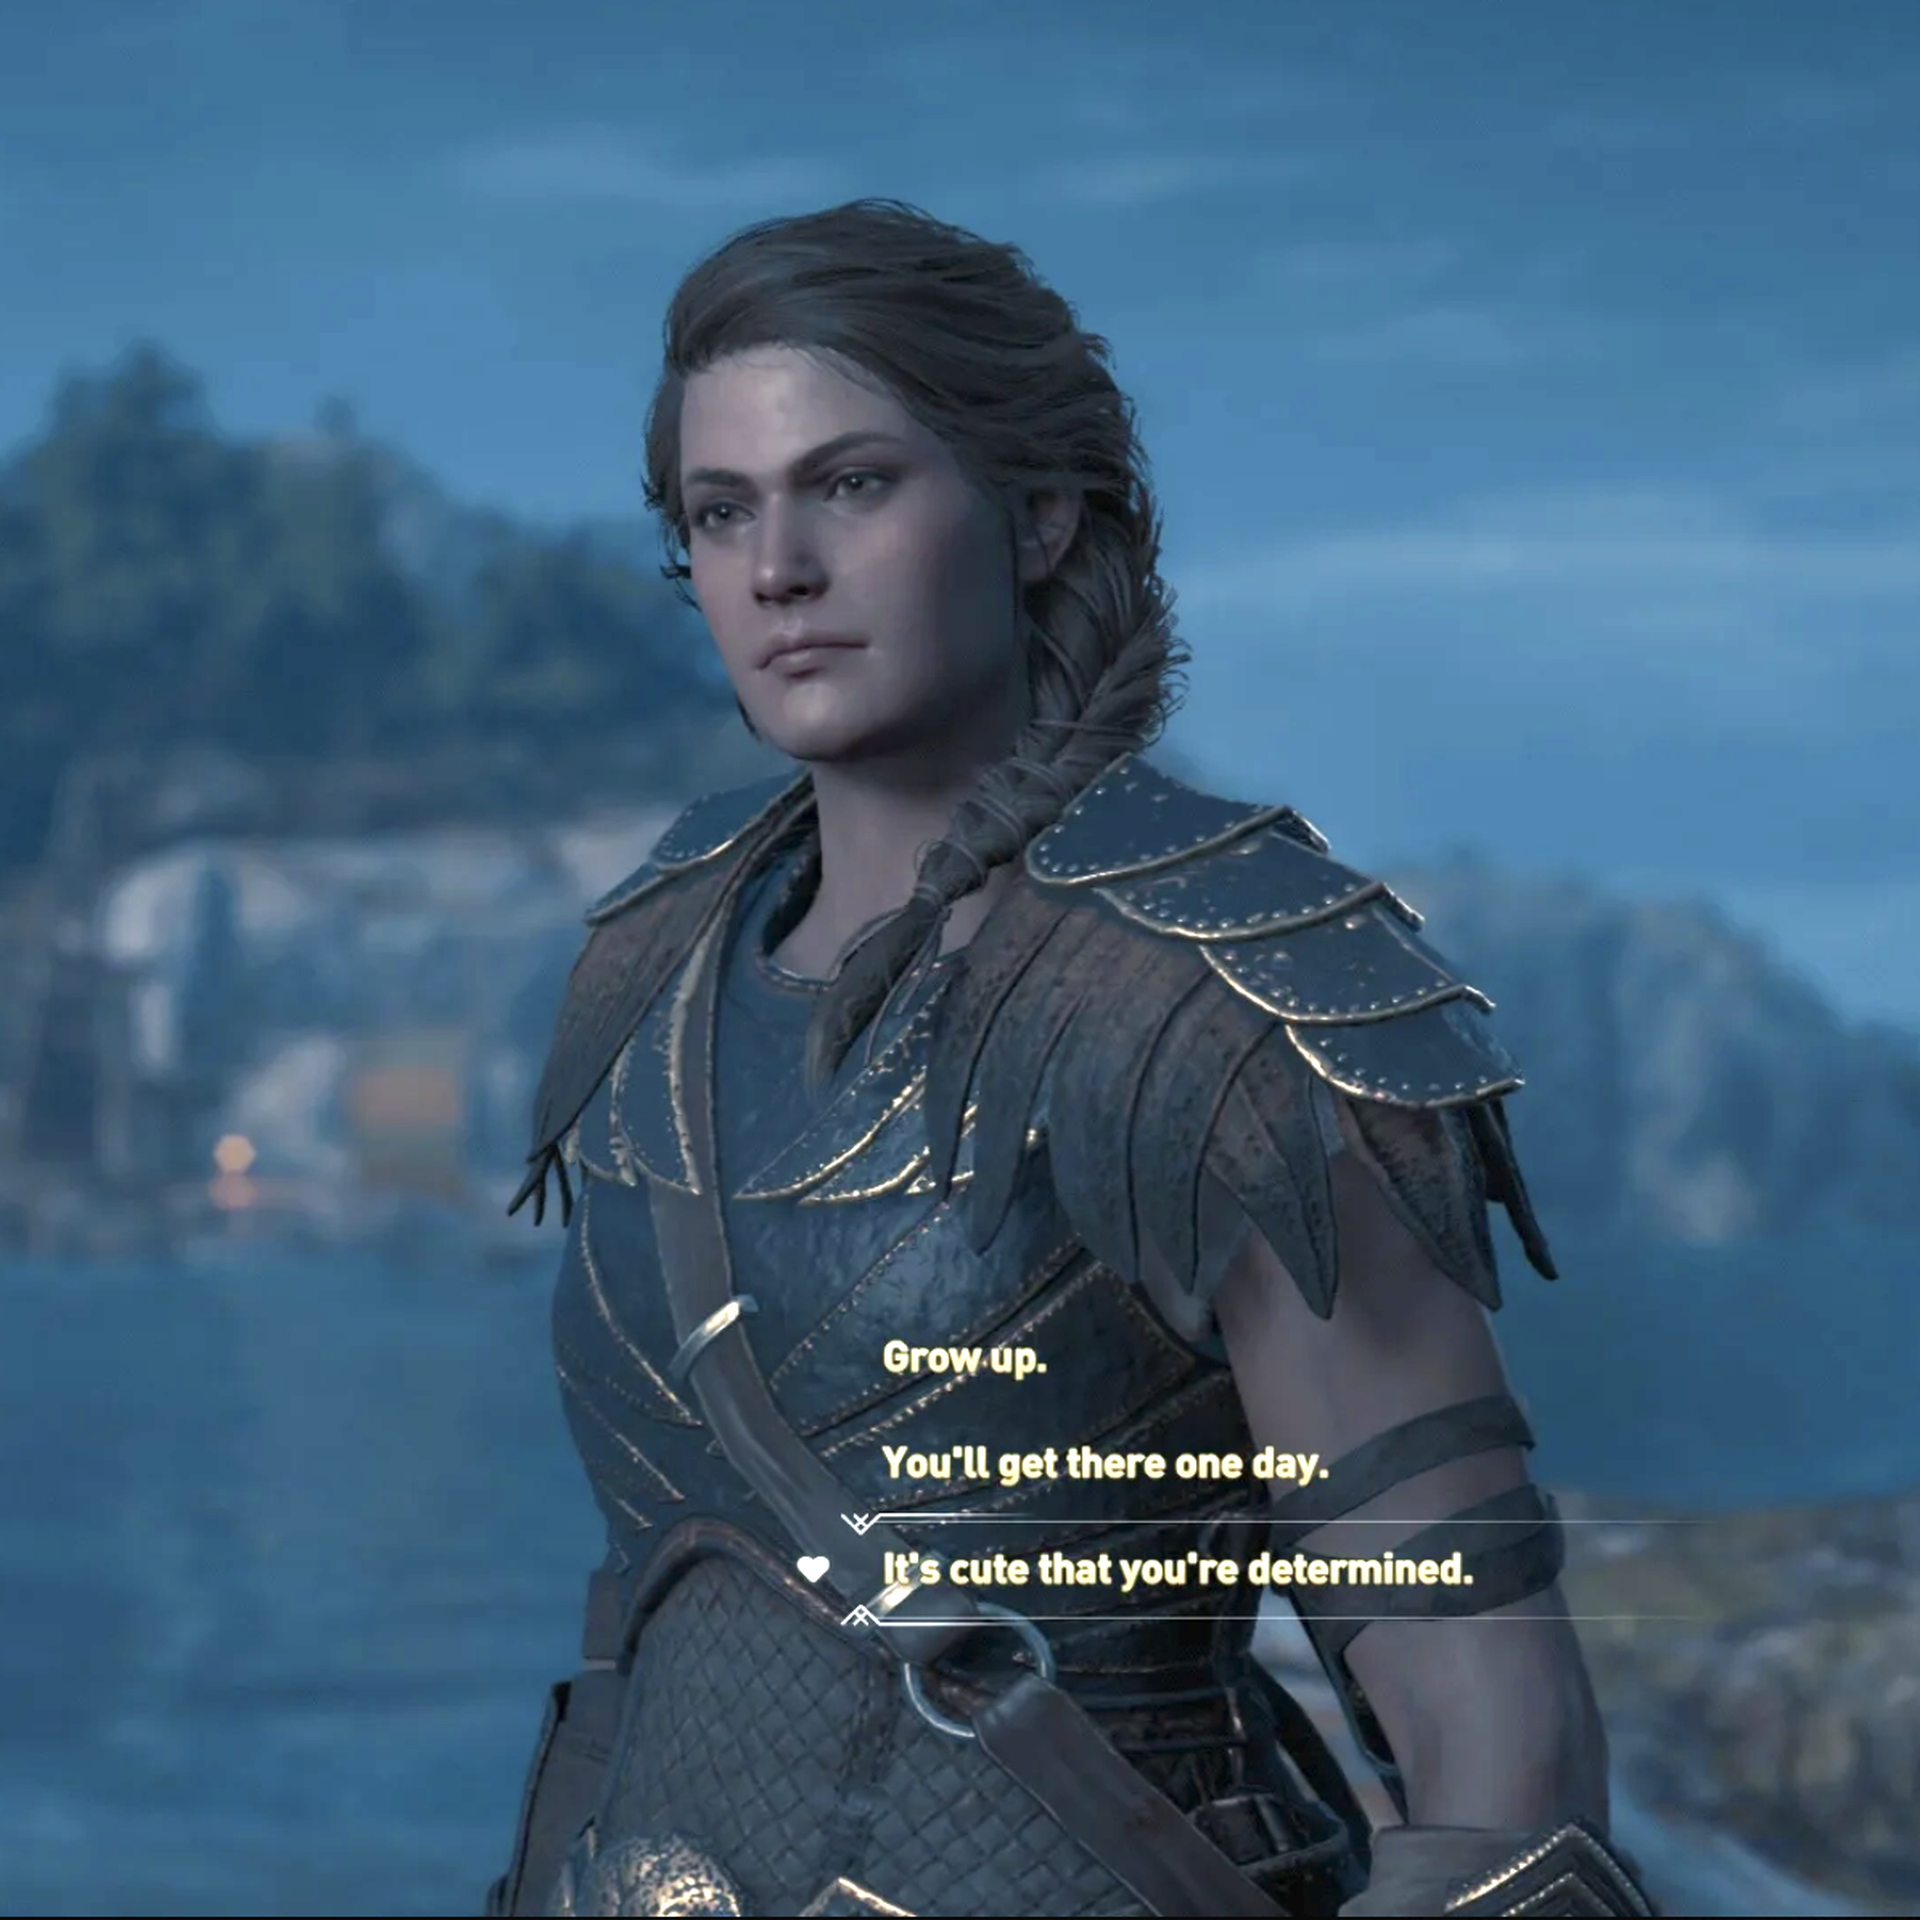 Game screenshot that shows dialogue choices, with "It's cute that you're determined." highlighted.